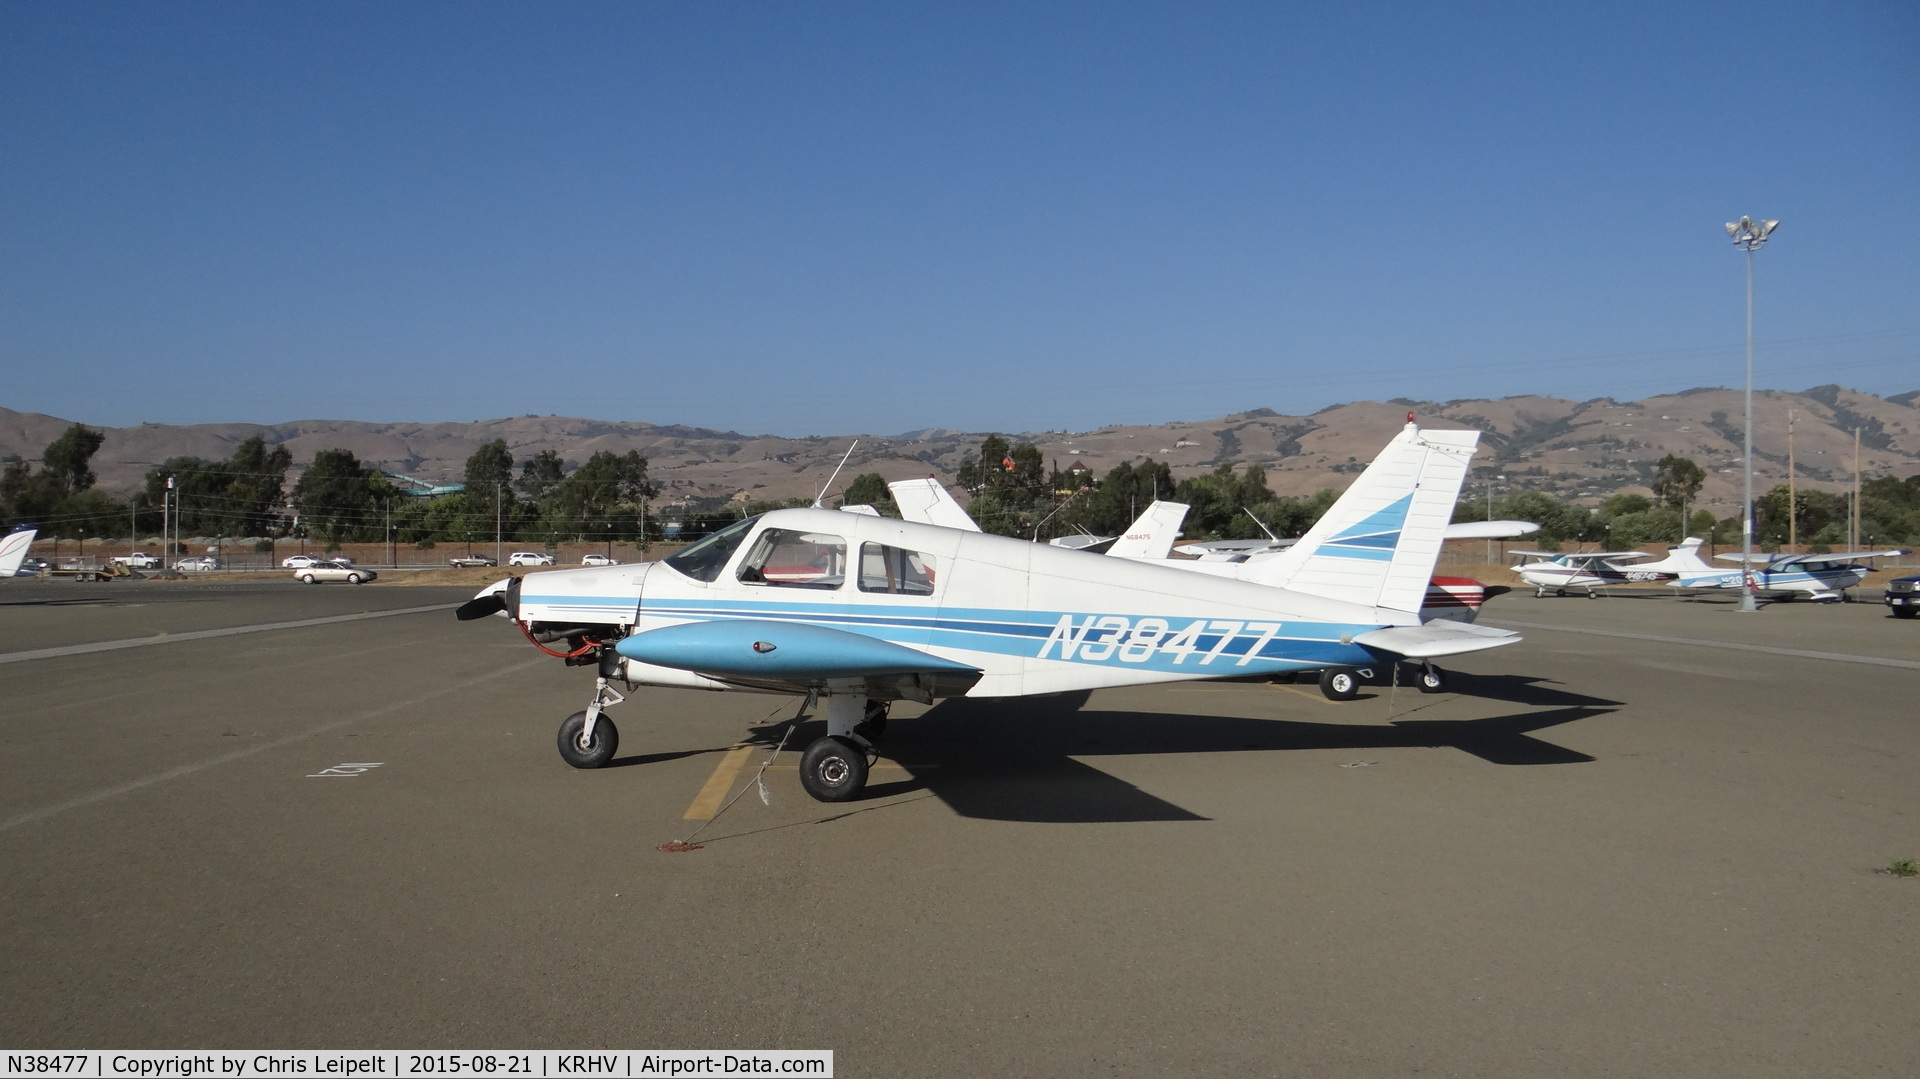 N38477, 1977 Piper PA-28-140 Cherokee C/N 28-7725282, Locally-based 1977 PA-28-140 sitting at the south tie downs at Reid Hillview Airport, San Jose, CA while the Nice Air ramp gets resurfaced. This is the busiest you will ever see the south tie downs since (as upload date) there are only 11 a/c there.